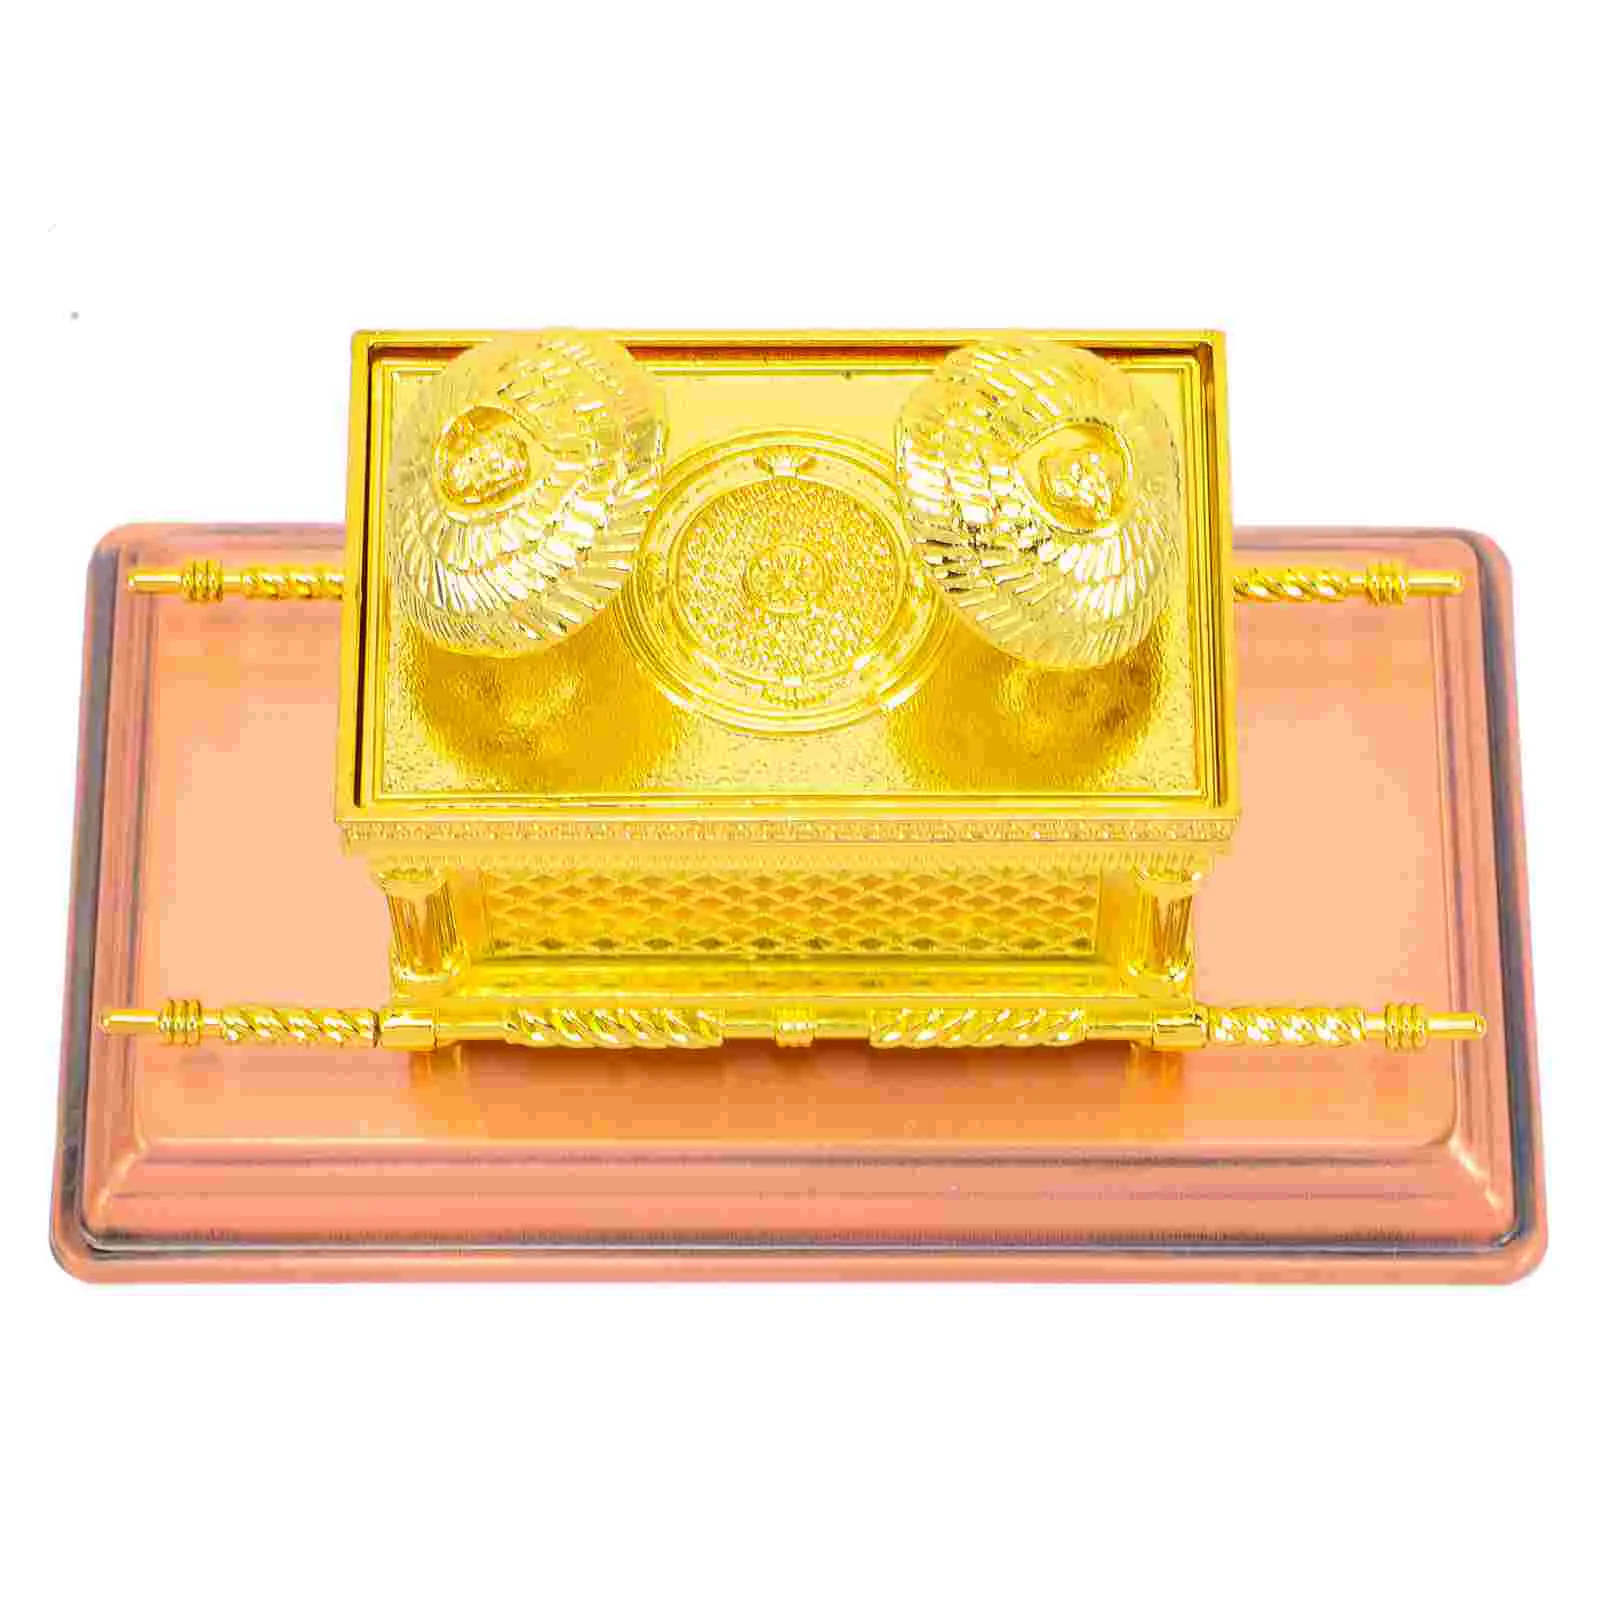 

Exquisite Religion Craft Model Household Alloy Ornament Church Tabletop Decor